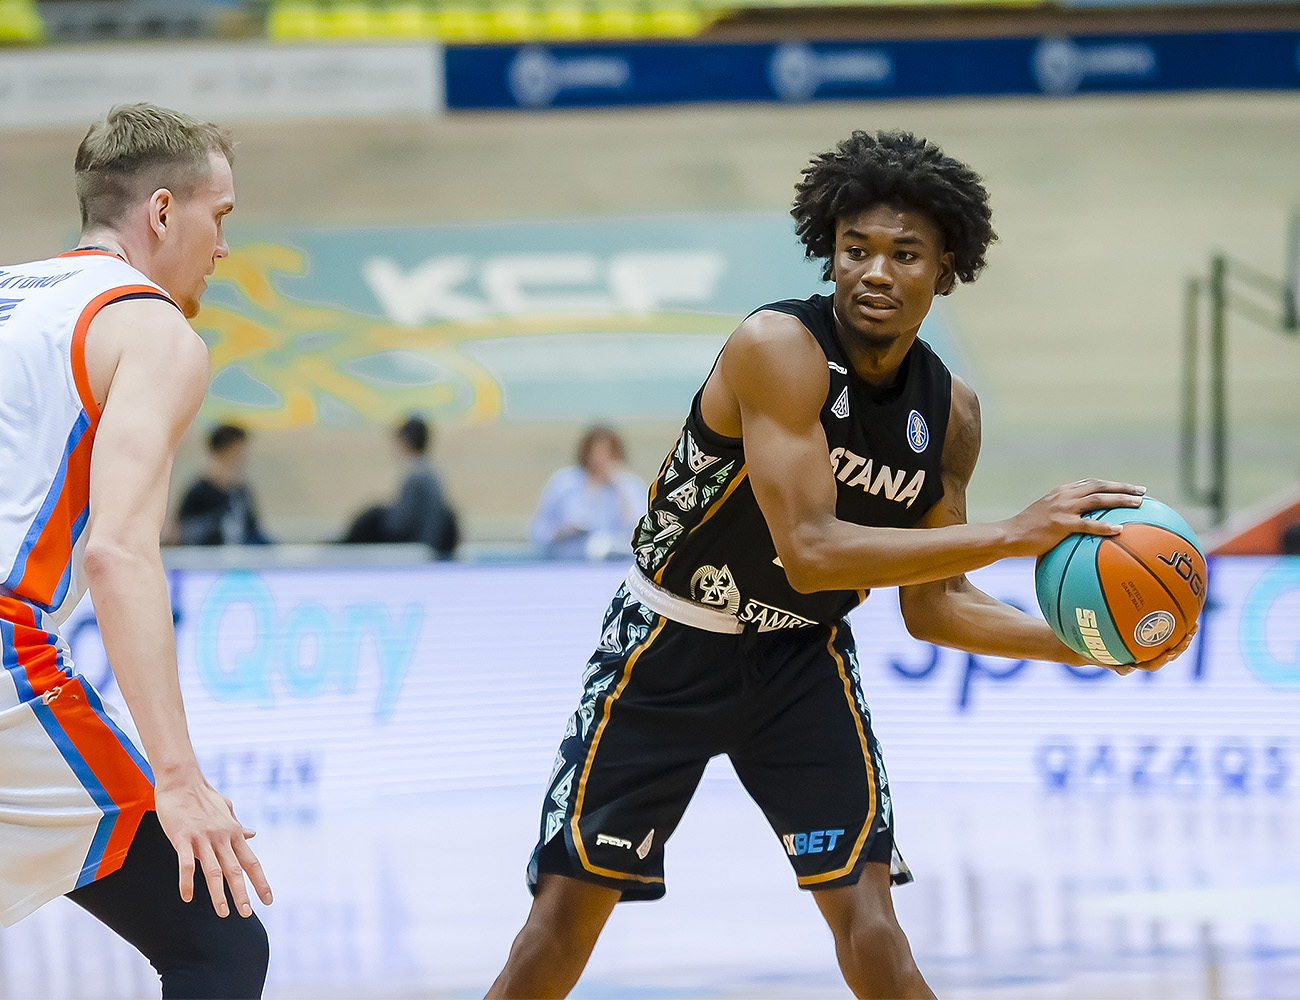 Astana and Carvel Anderson delight fans at home again by defeating Samara